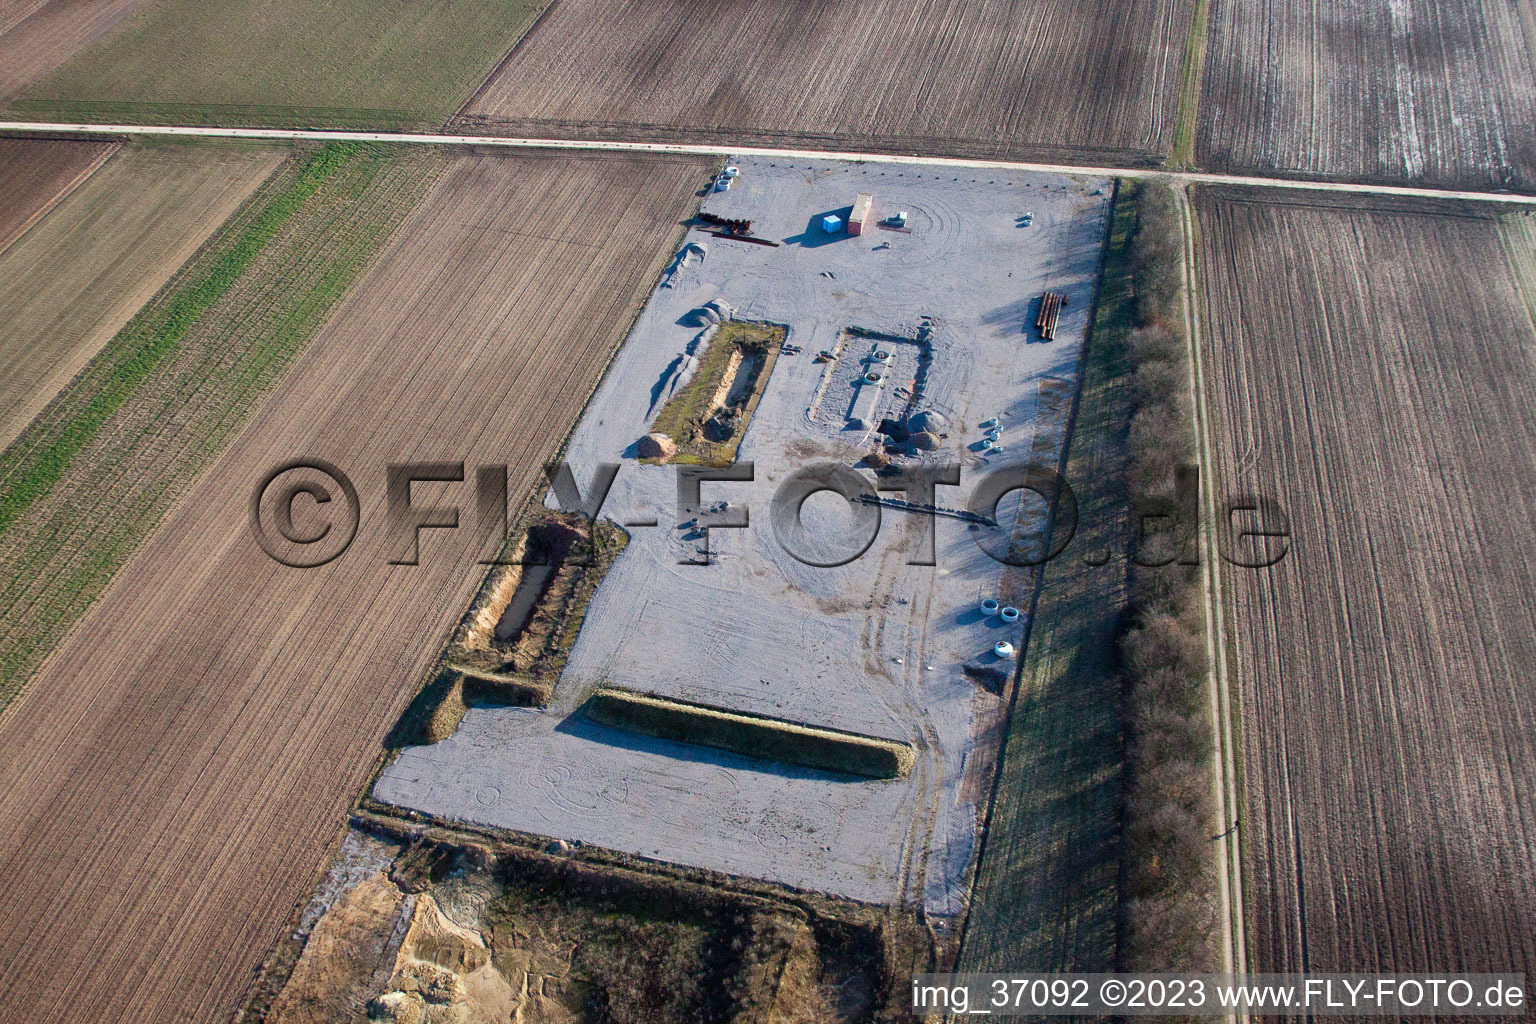 Aerial view of Geothermal construction site in Herxheimweyher in the state Rhineland-Palatinate, Germany